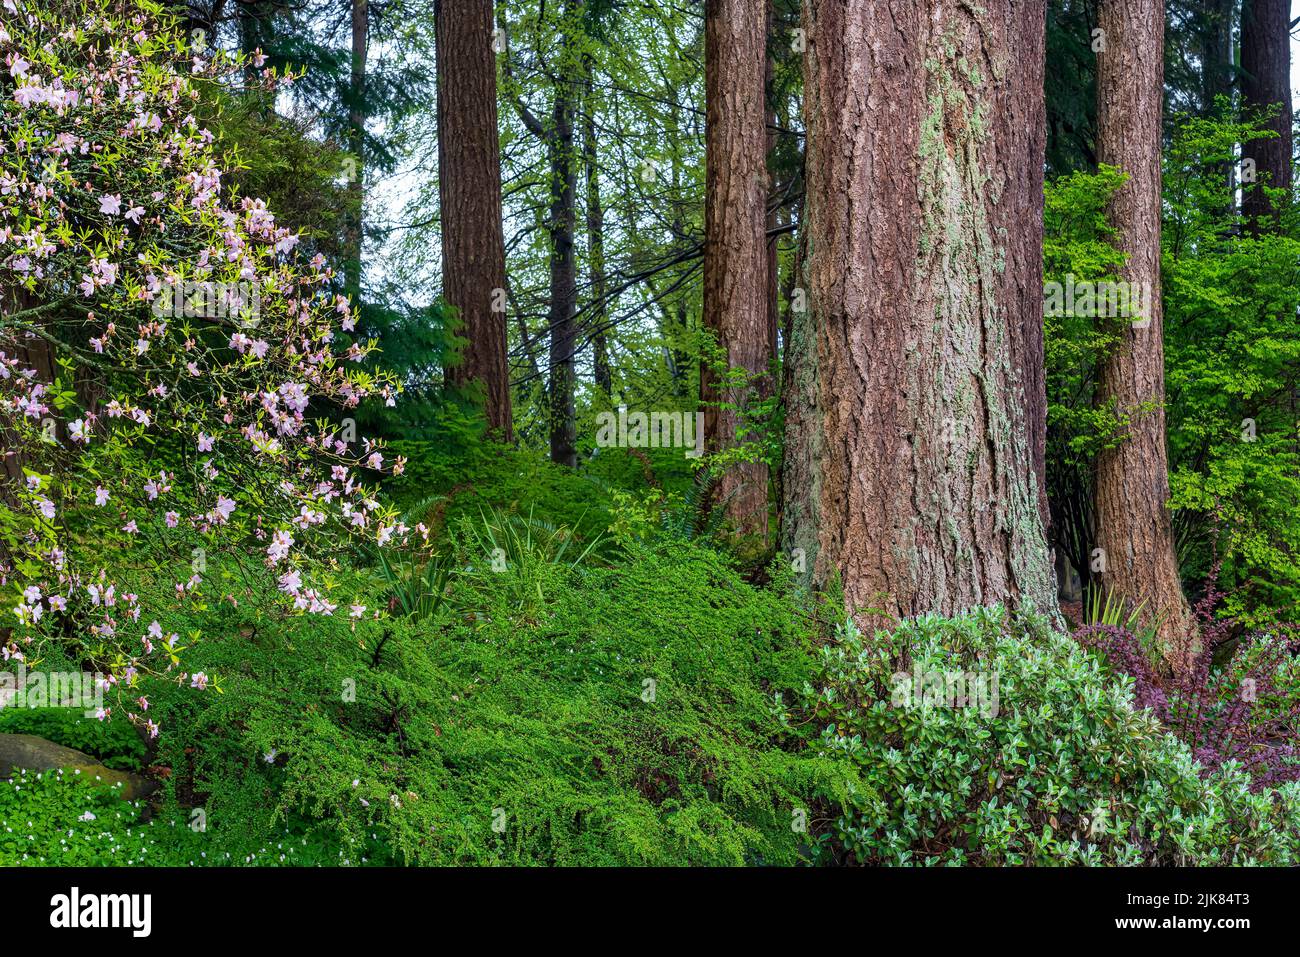 Large redwood trees in the forest of Stanley Park, Vancouver, British Columbia, Canada. Stock Photo